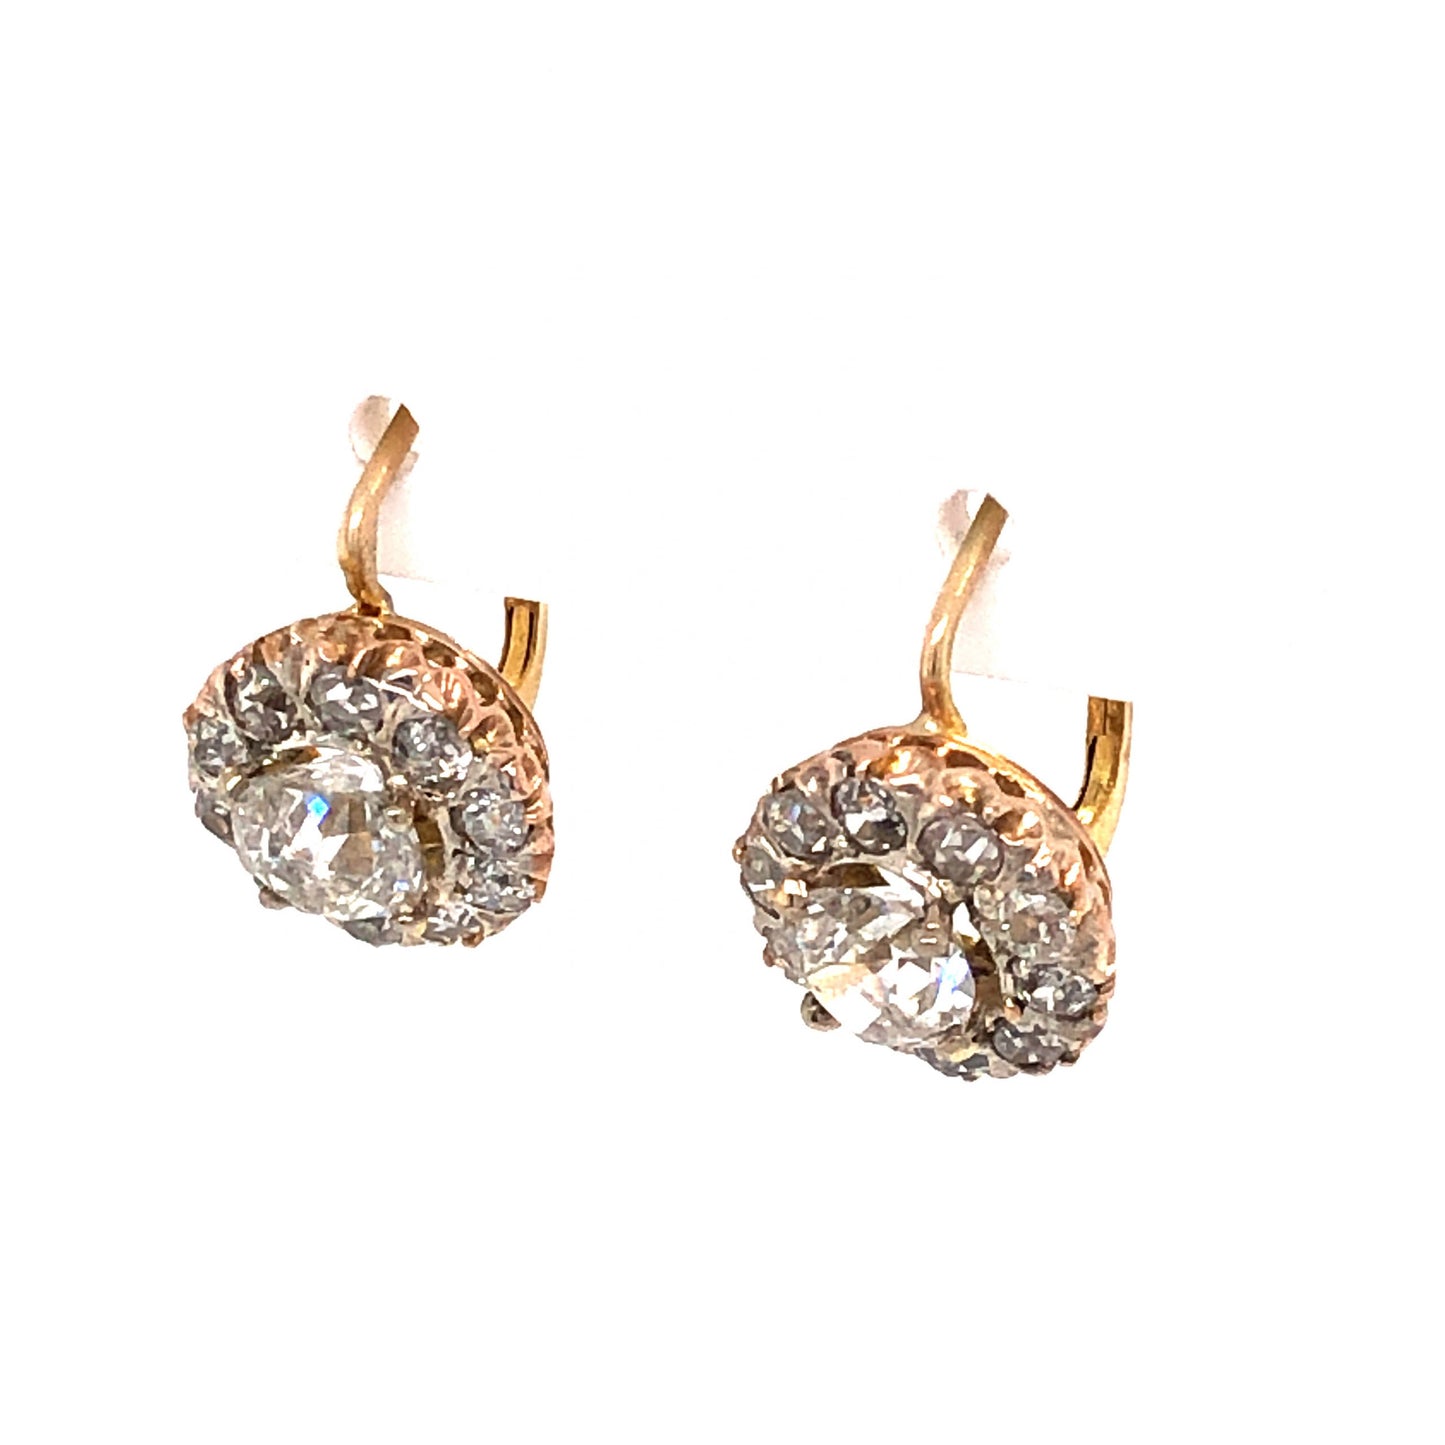 2.48 Victorian Old Mine Cut Diamond Earrings in 14k Gold and Silver